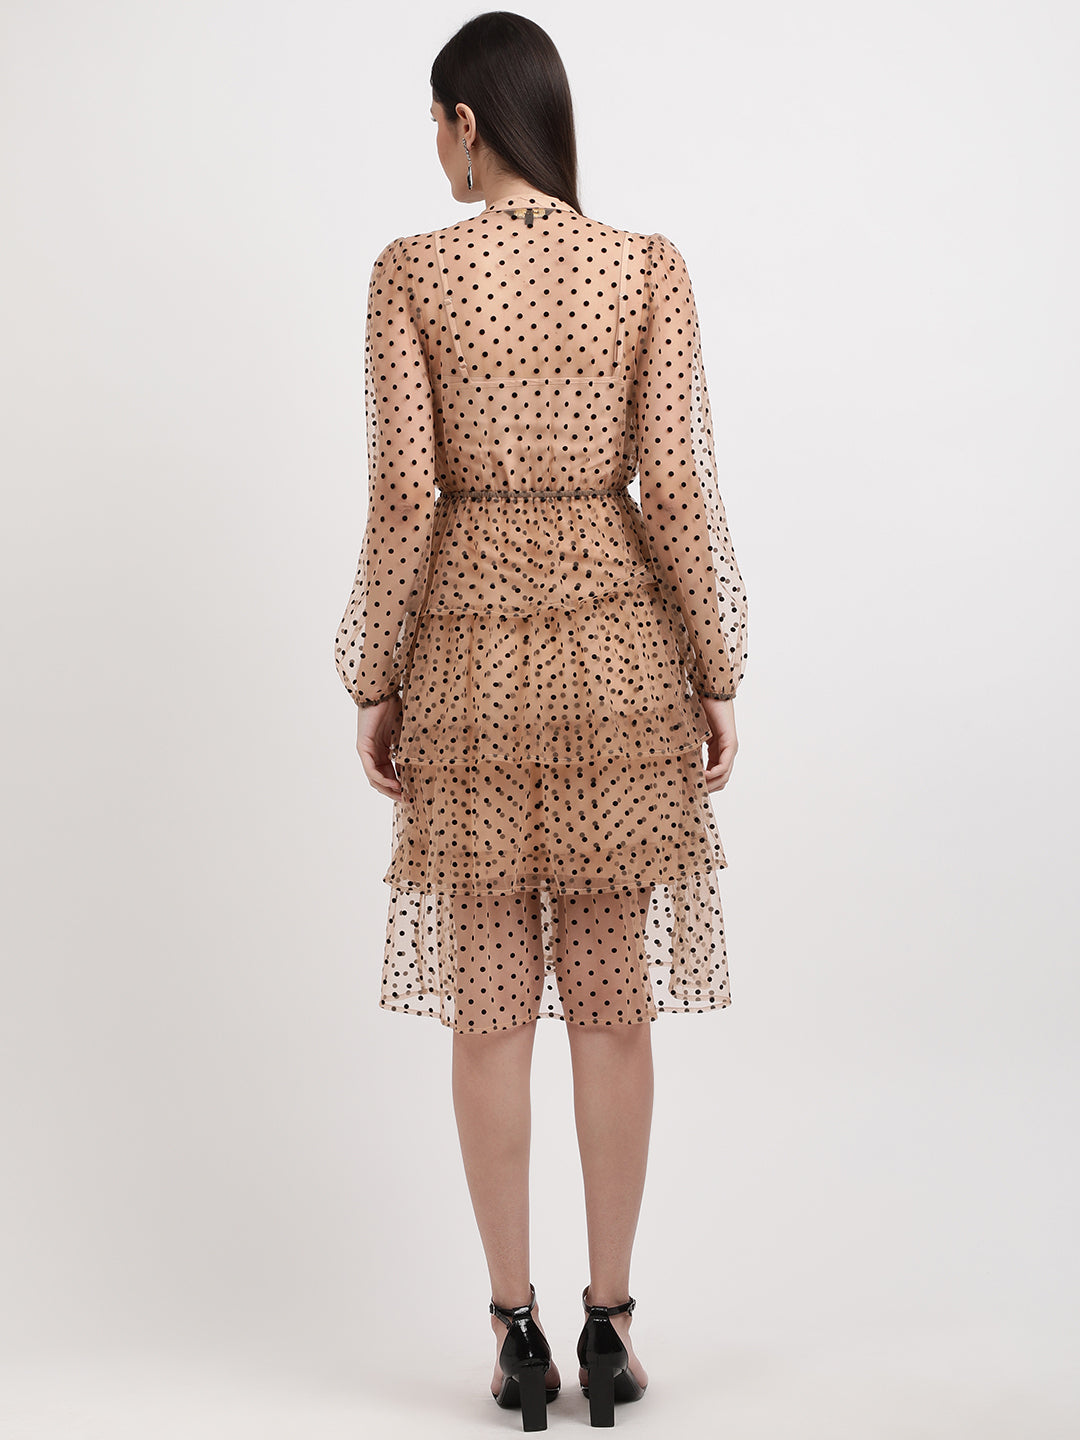 Centre Stage Women Beige Printed Band Collar Dress